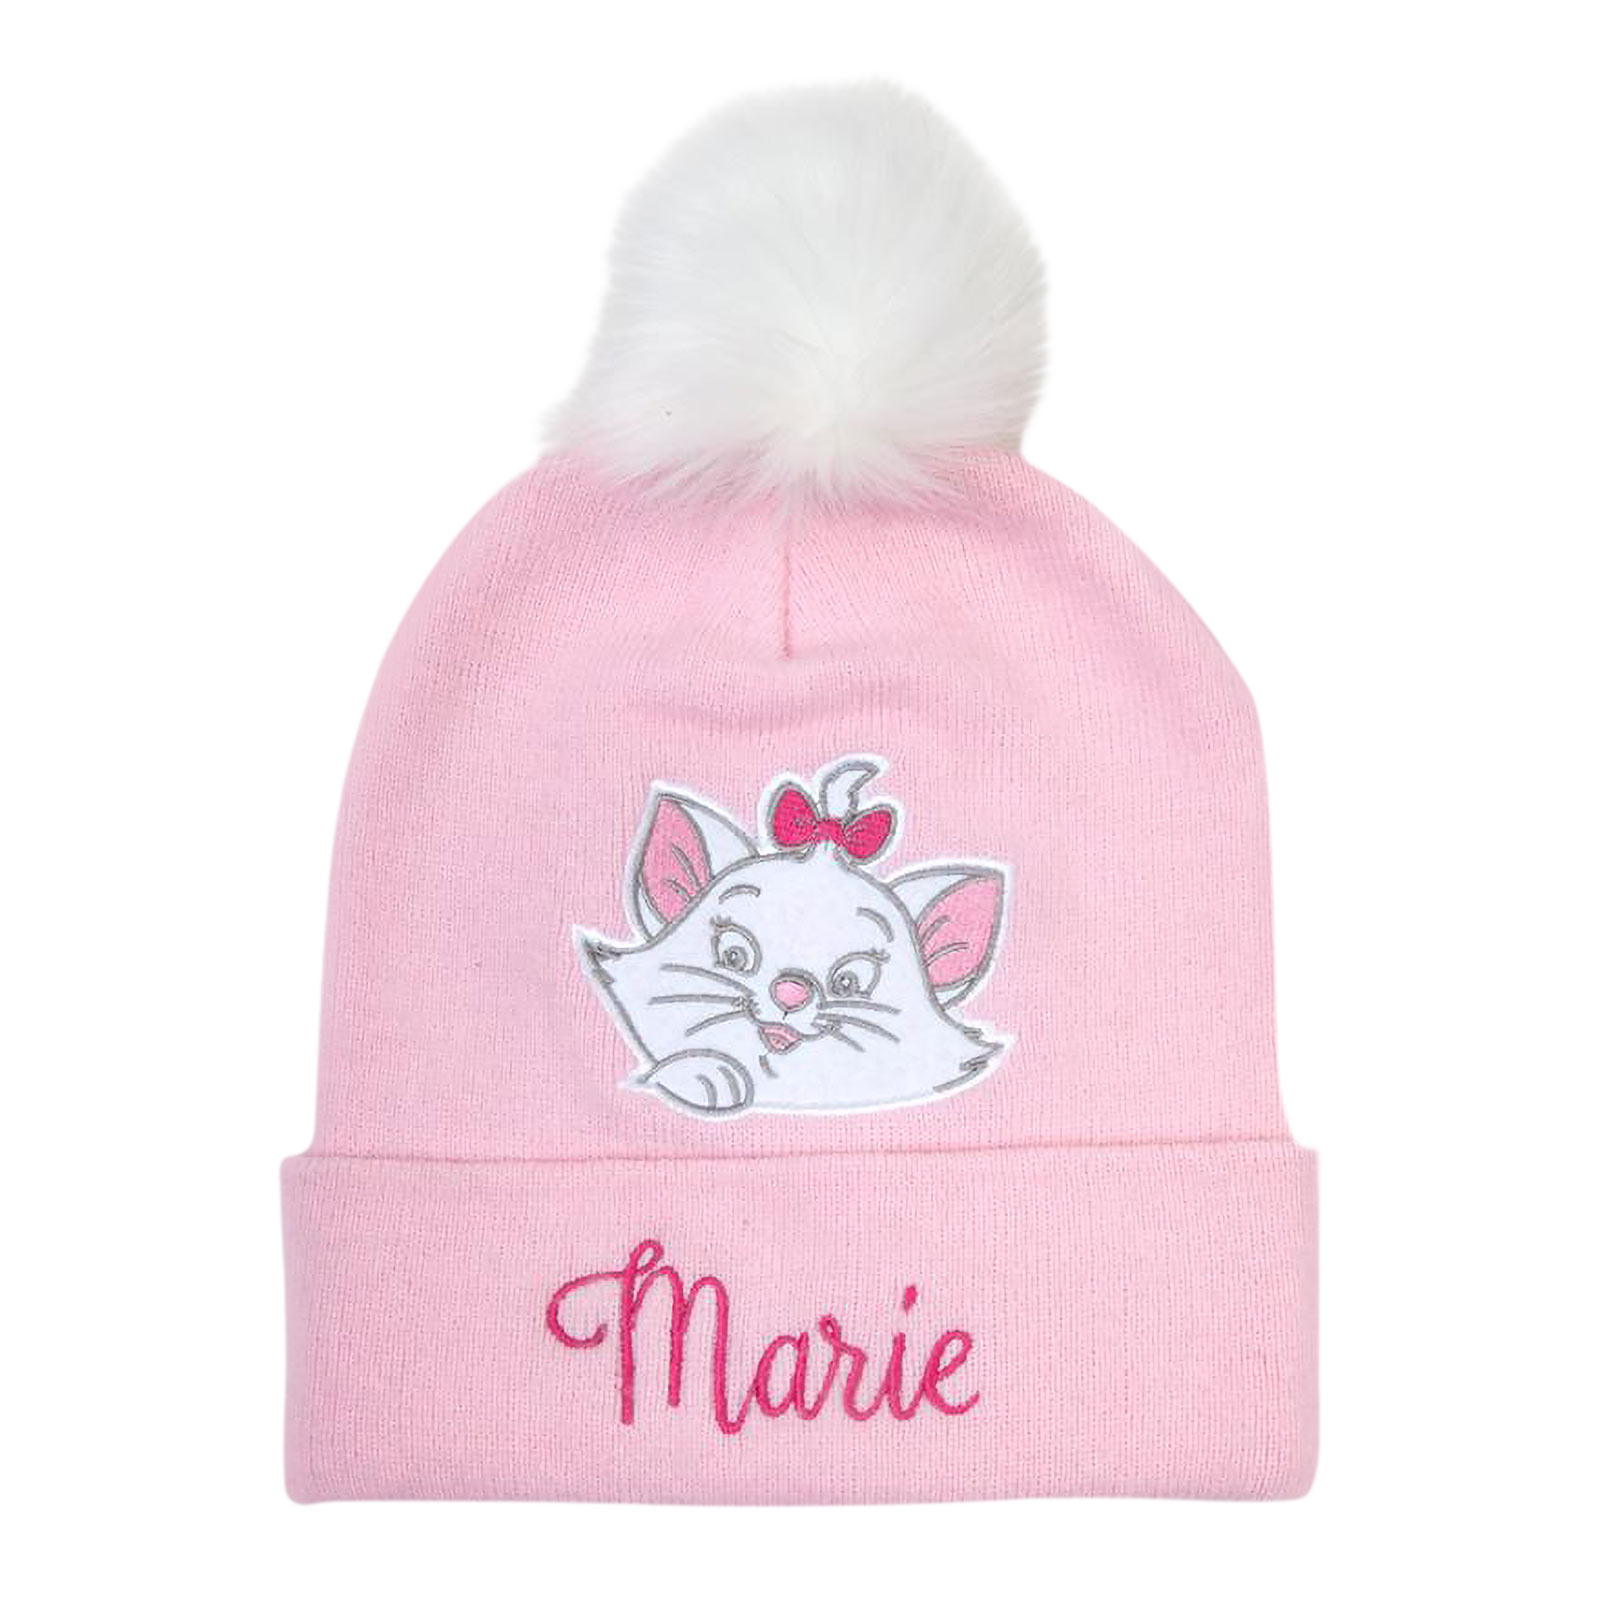 Aristocats - Marie Hat Pink